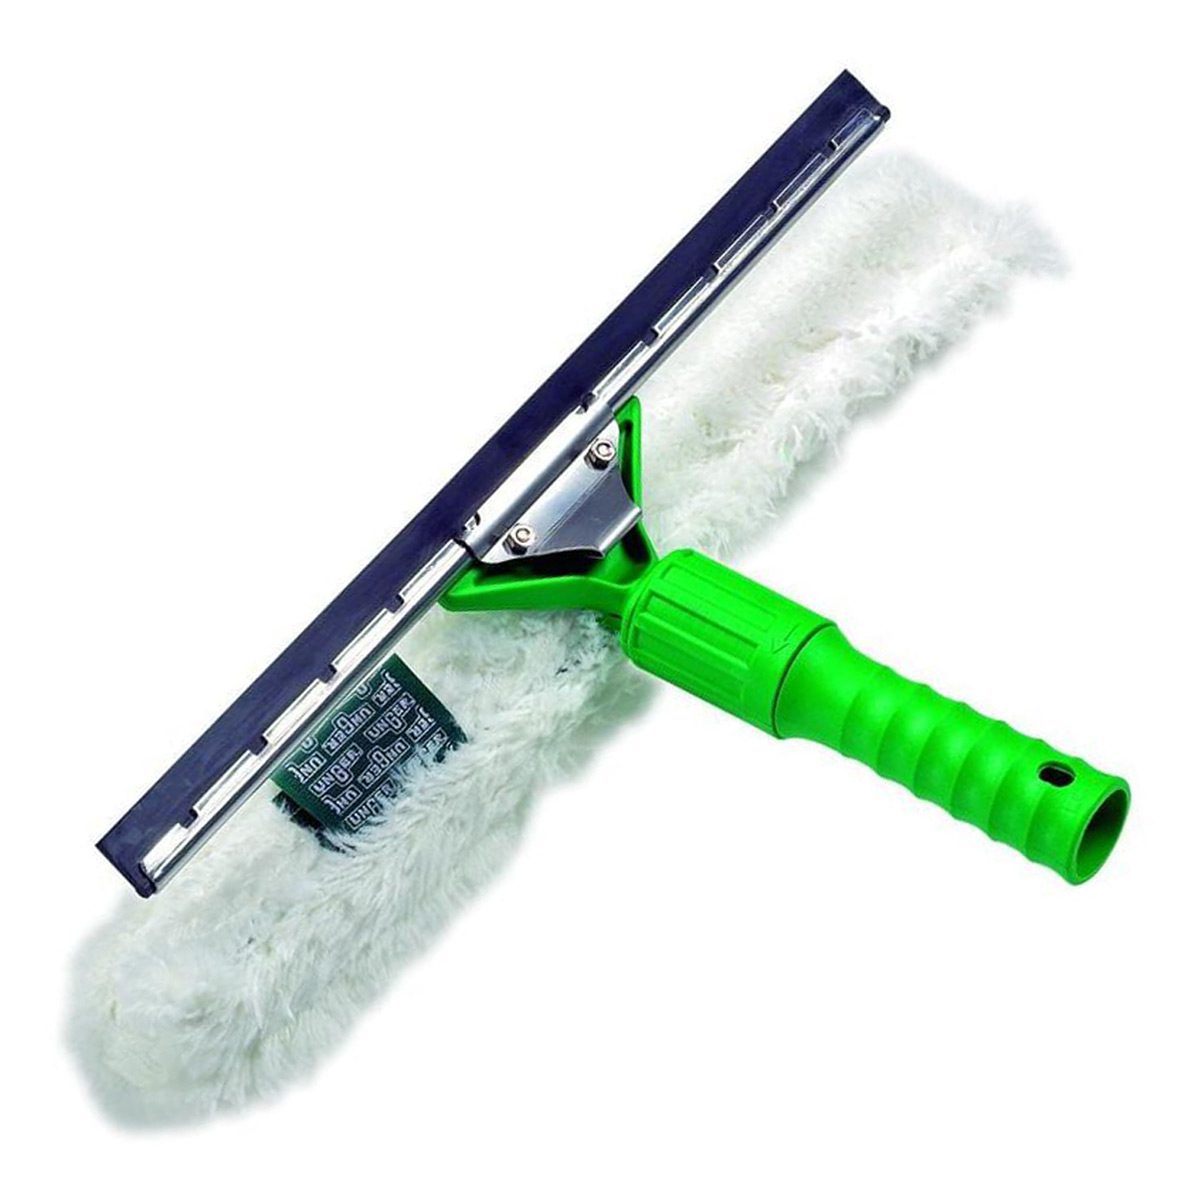 cleaning-equipment-squeegees-and-window-cleaning-unger-washer-and-squeegee-combo-14inch-35cm-time-saving-performance-fits-securely-to-pole-with-locking-cone-for-extra-safety-vjs-distributors-U-VP350